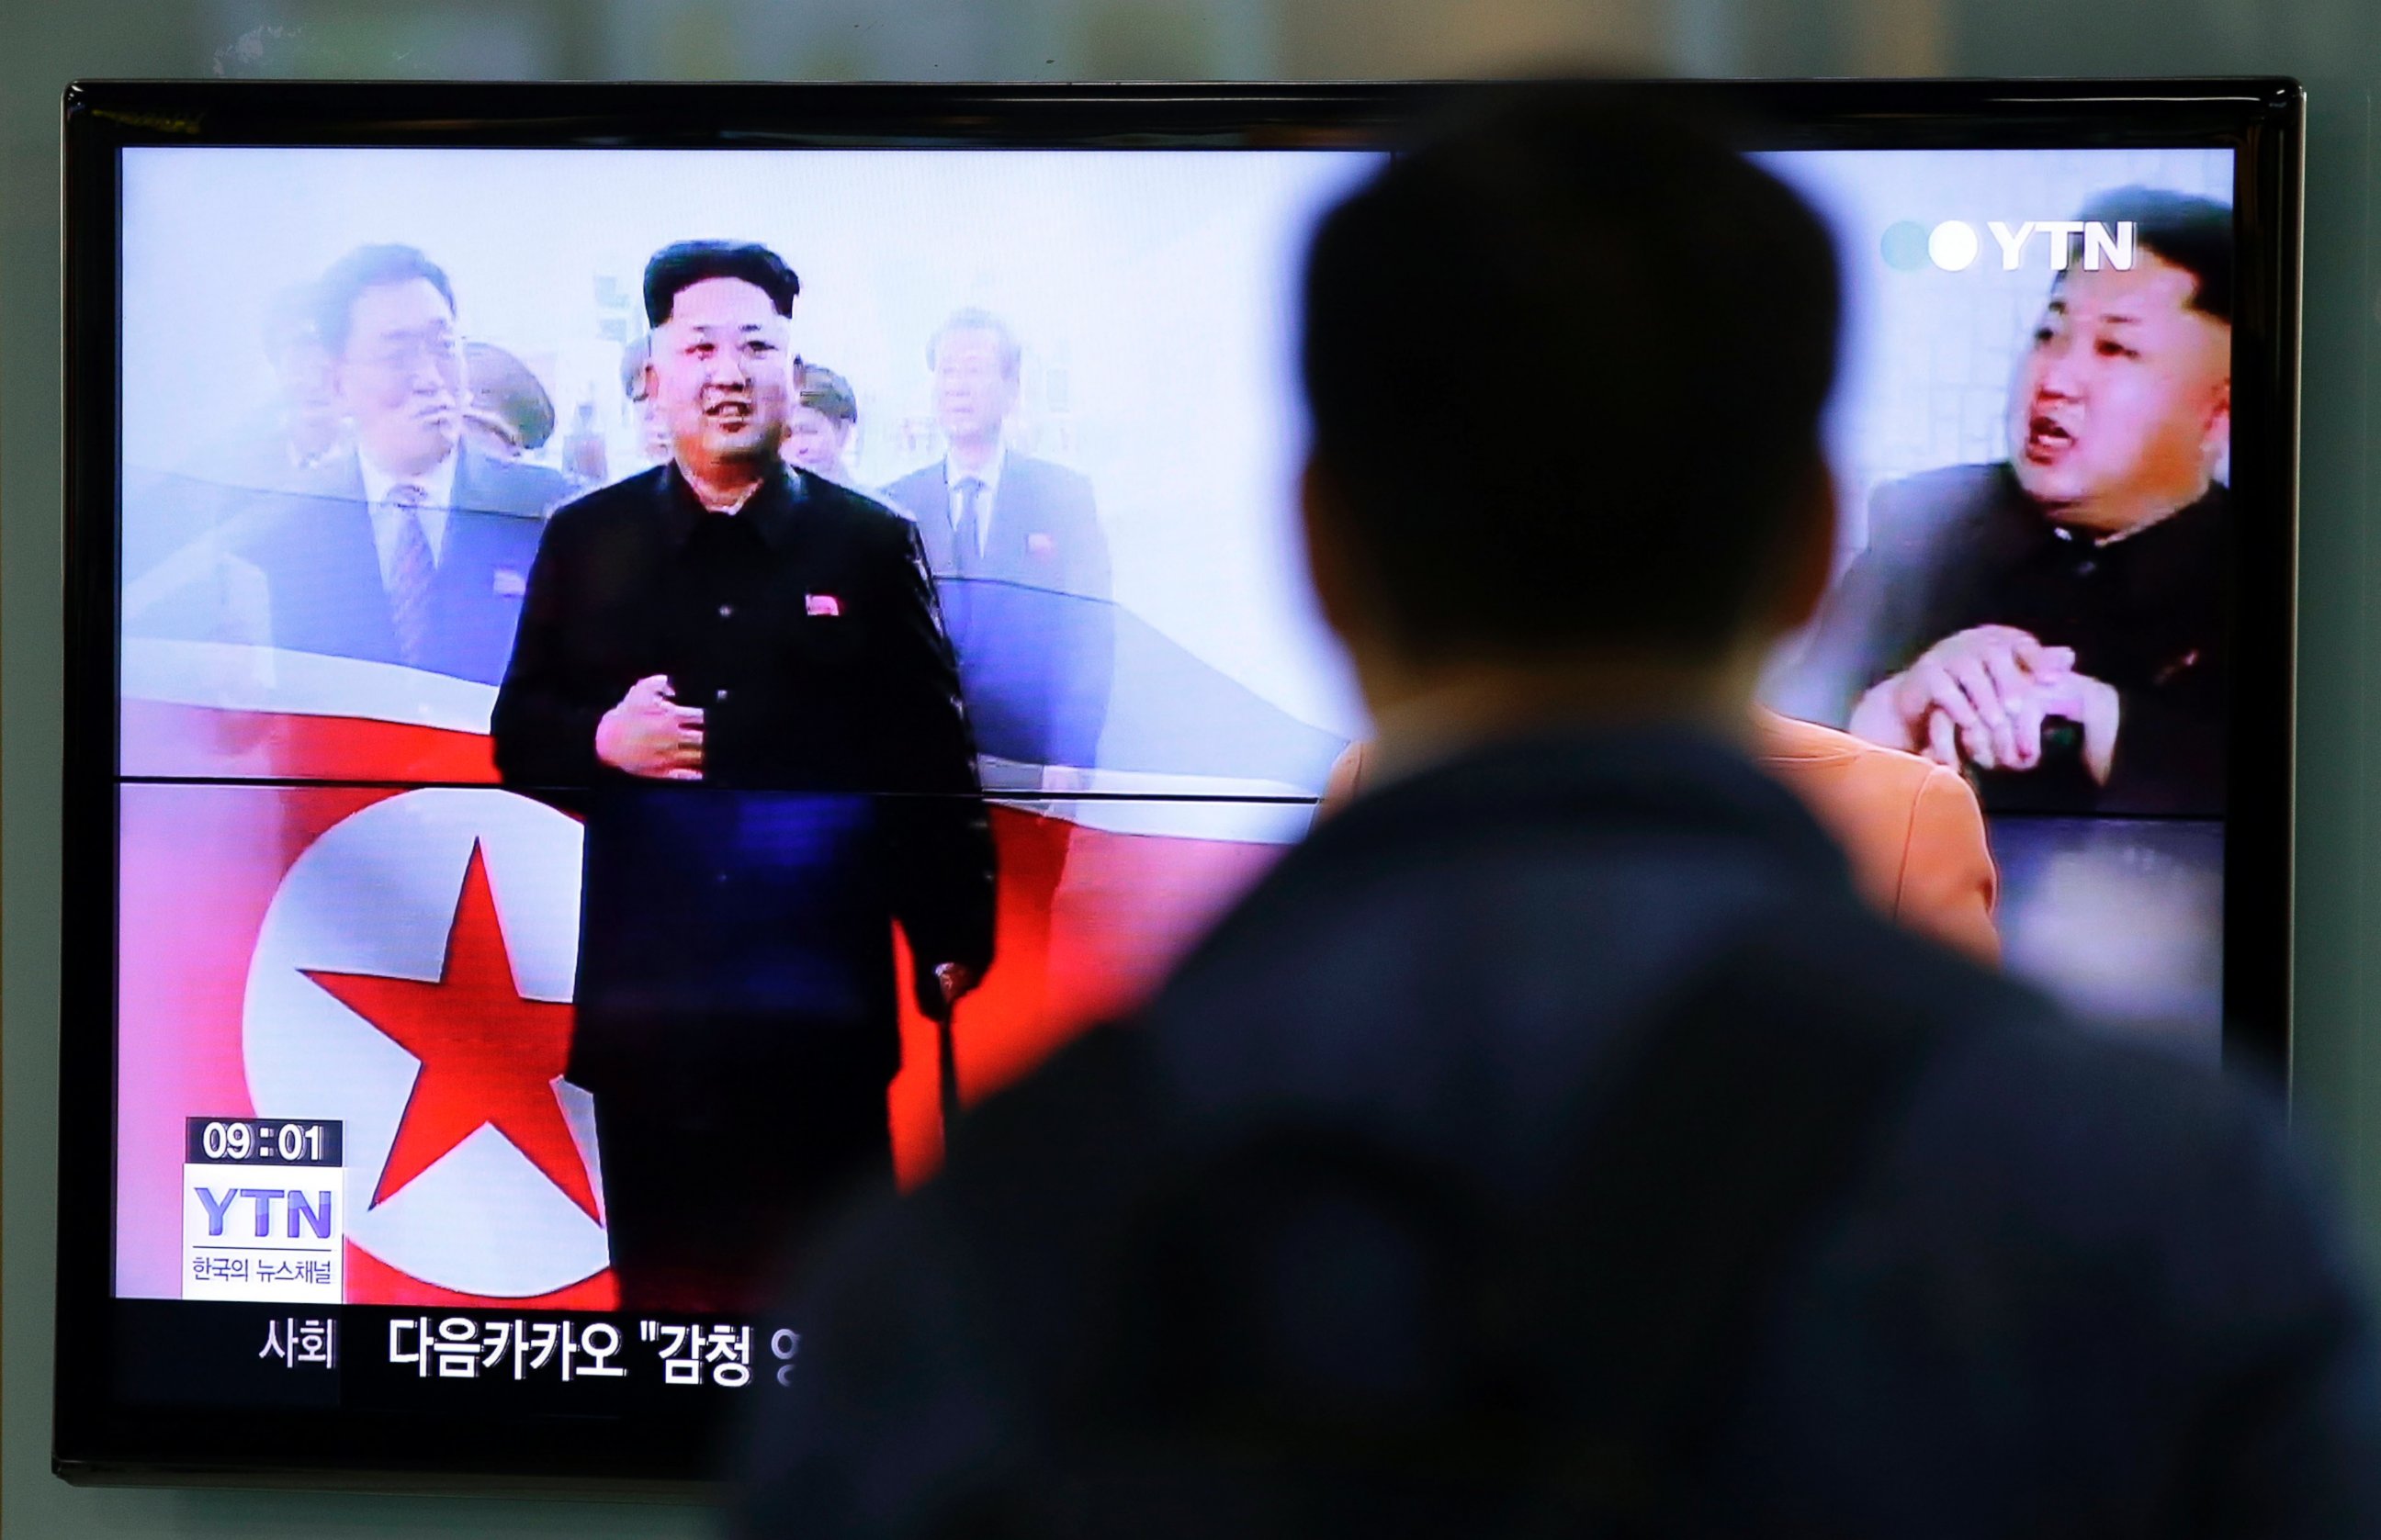 PHOTO: A man watches a TV news program in Seoul, South Korea, Oct. 14, 2014, showing North Korean leader Kim Jong-un using a cane, reportedly during his first public appearance in five weeks in Pyongyang, North Korea.